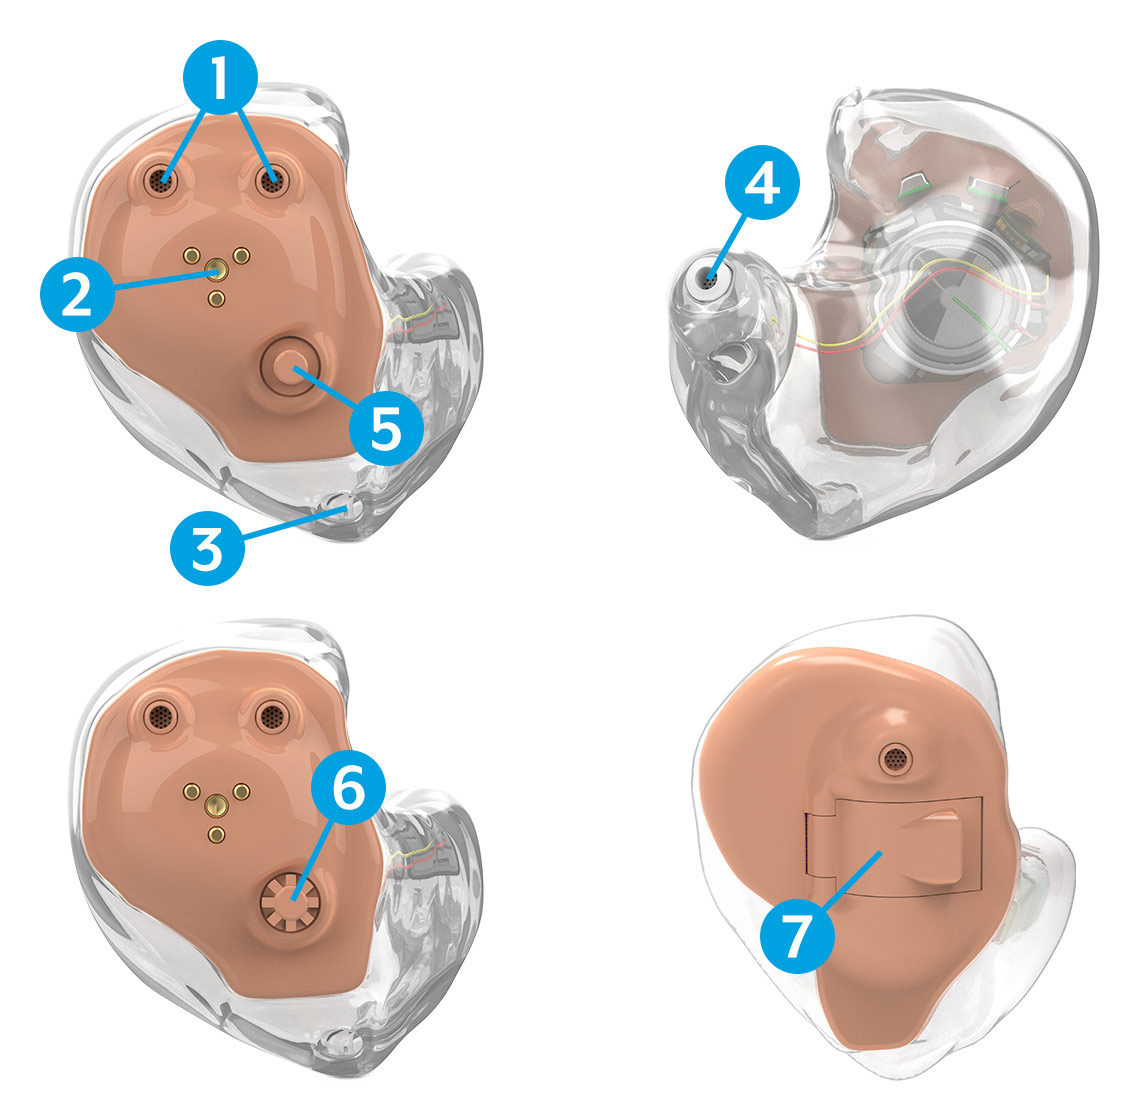 Diagram showing a custom in-the-ear hearing aid from different angles